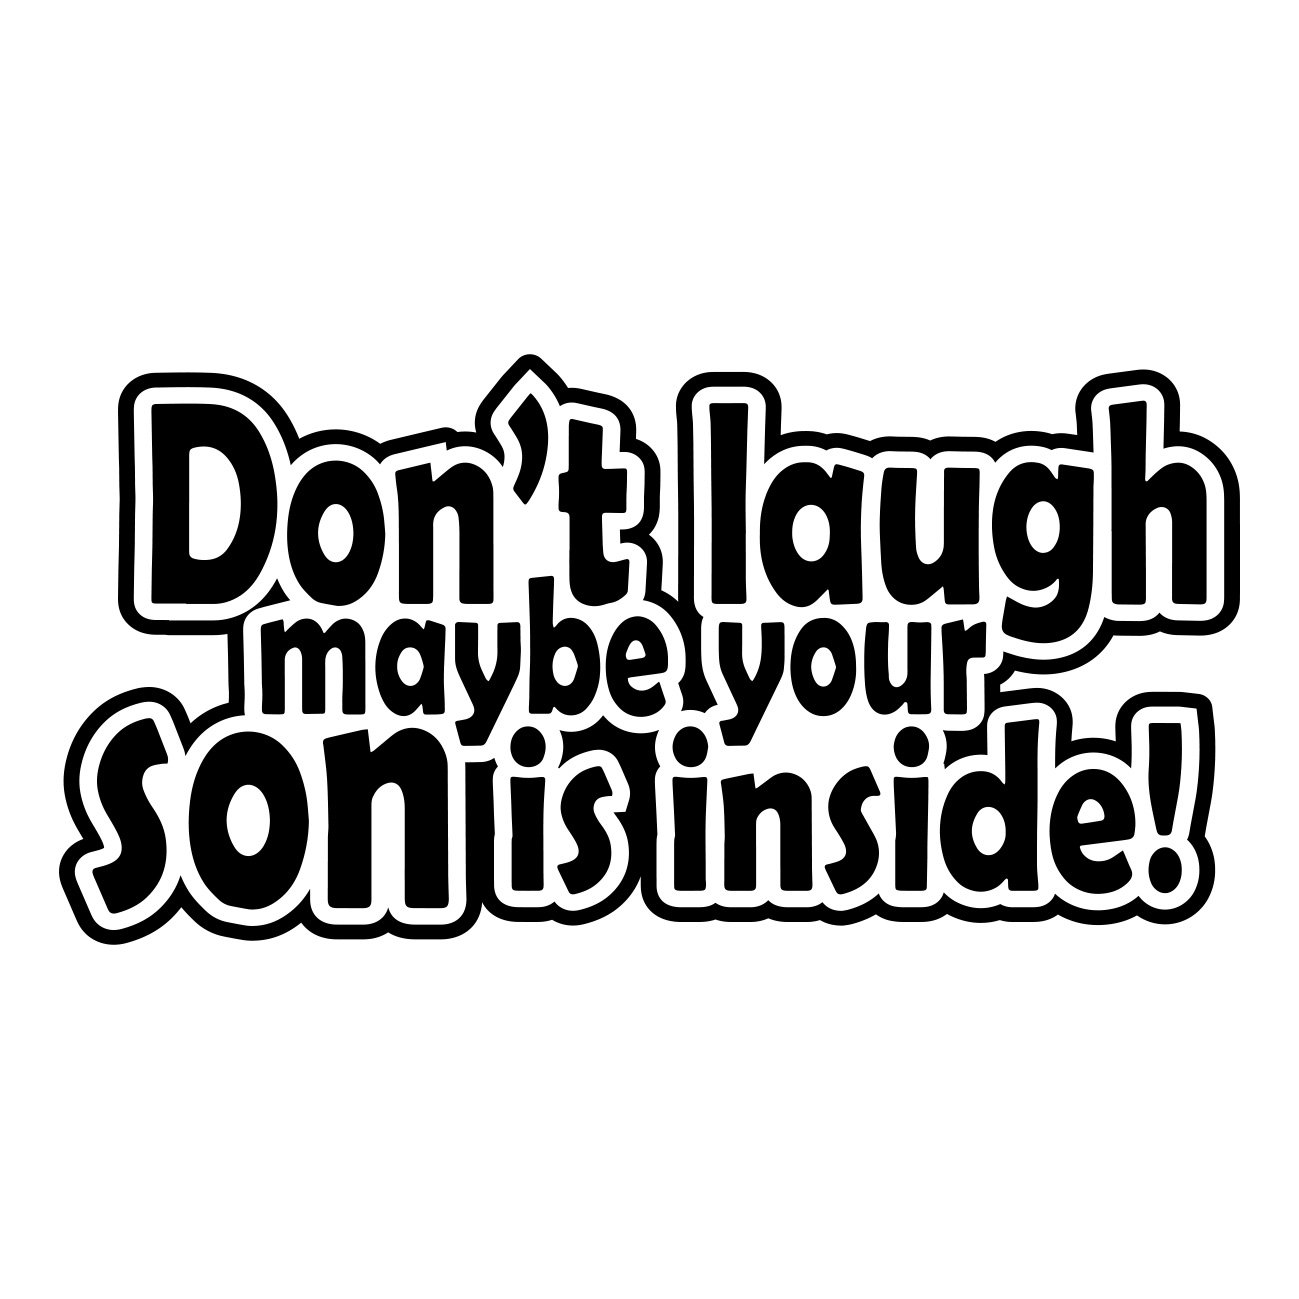 dont laugh maybe your son is inside